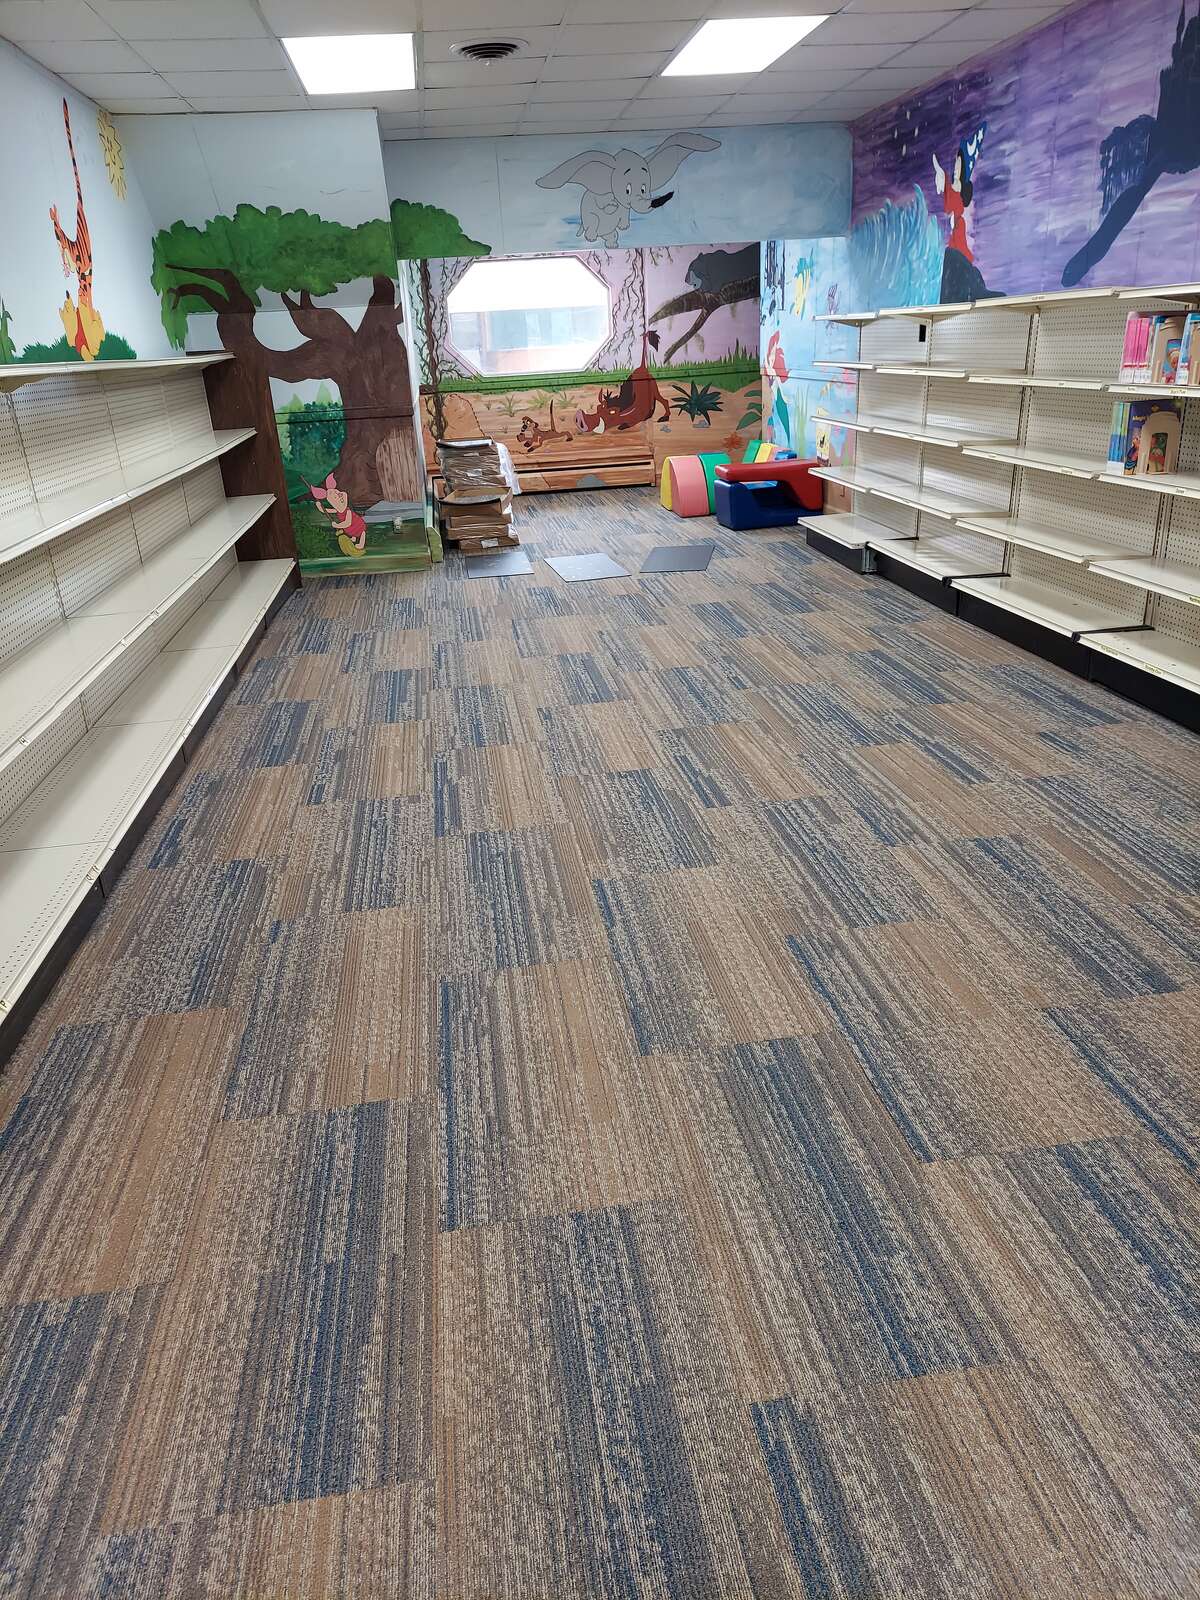 The new childrens' room, looks bright and comforting for children visiting the library.   